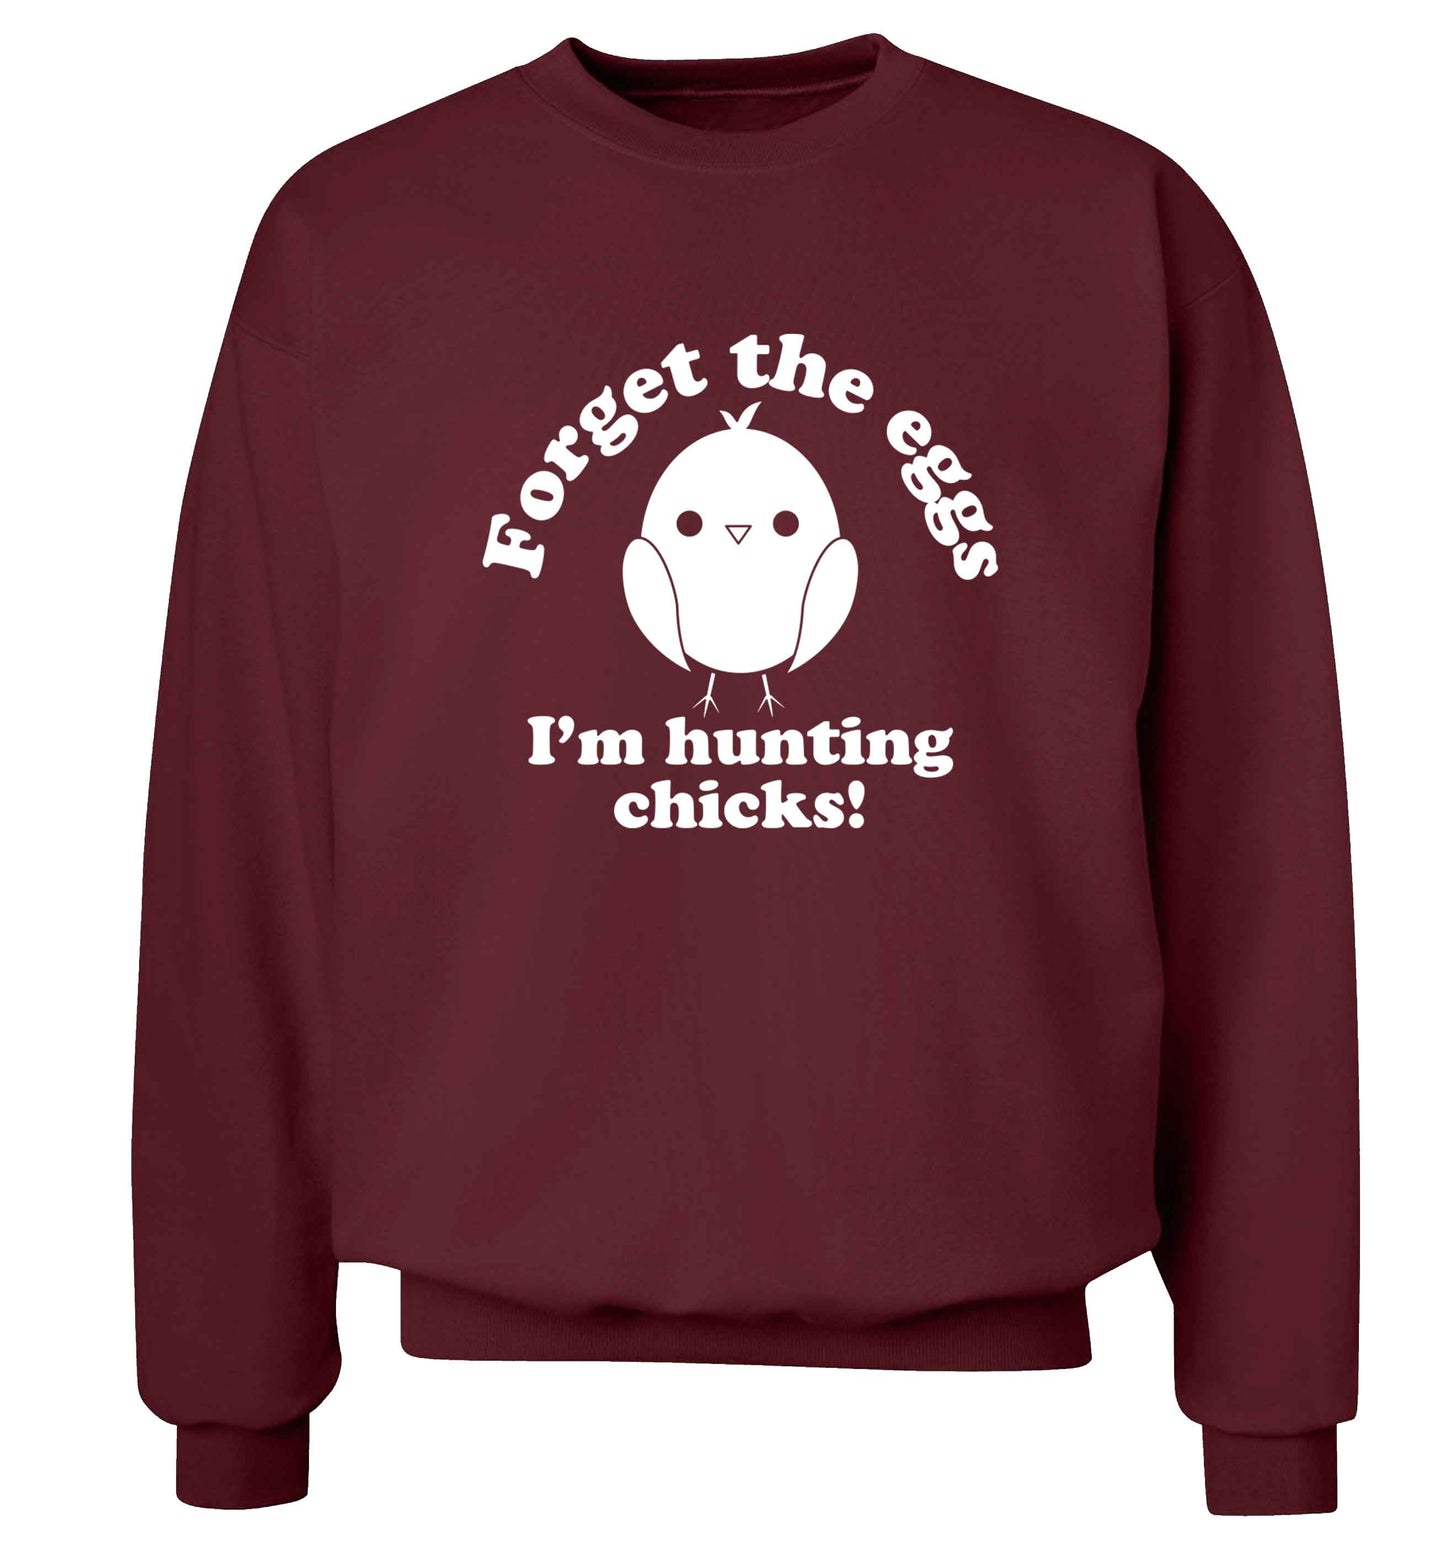 Forget the eggs I'm hunting chicks! adult's unisex maroon sweater 2XL